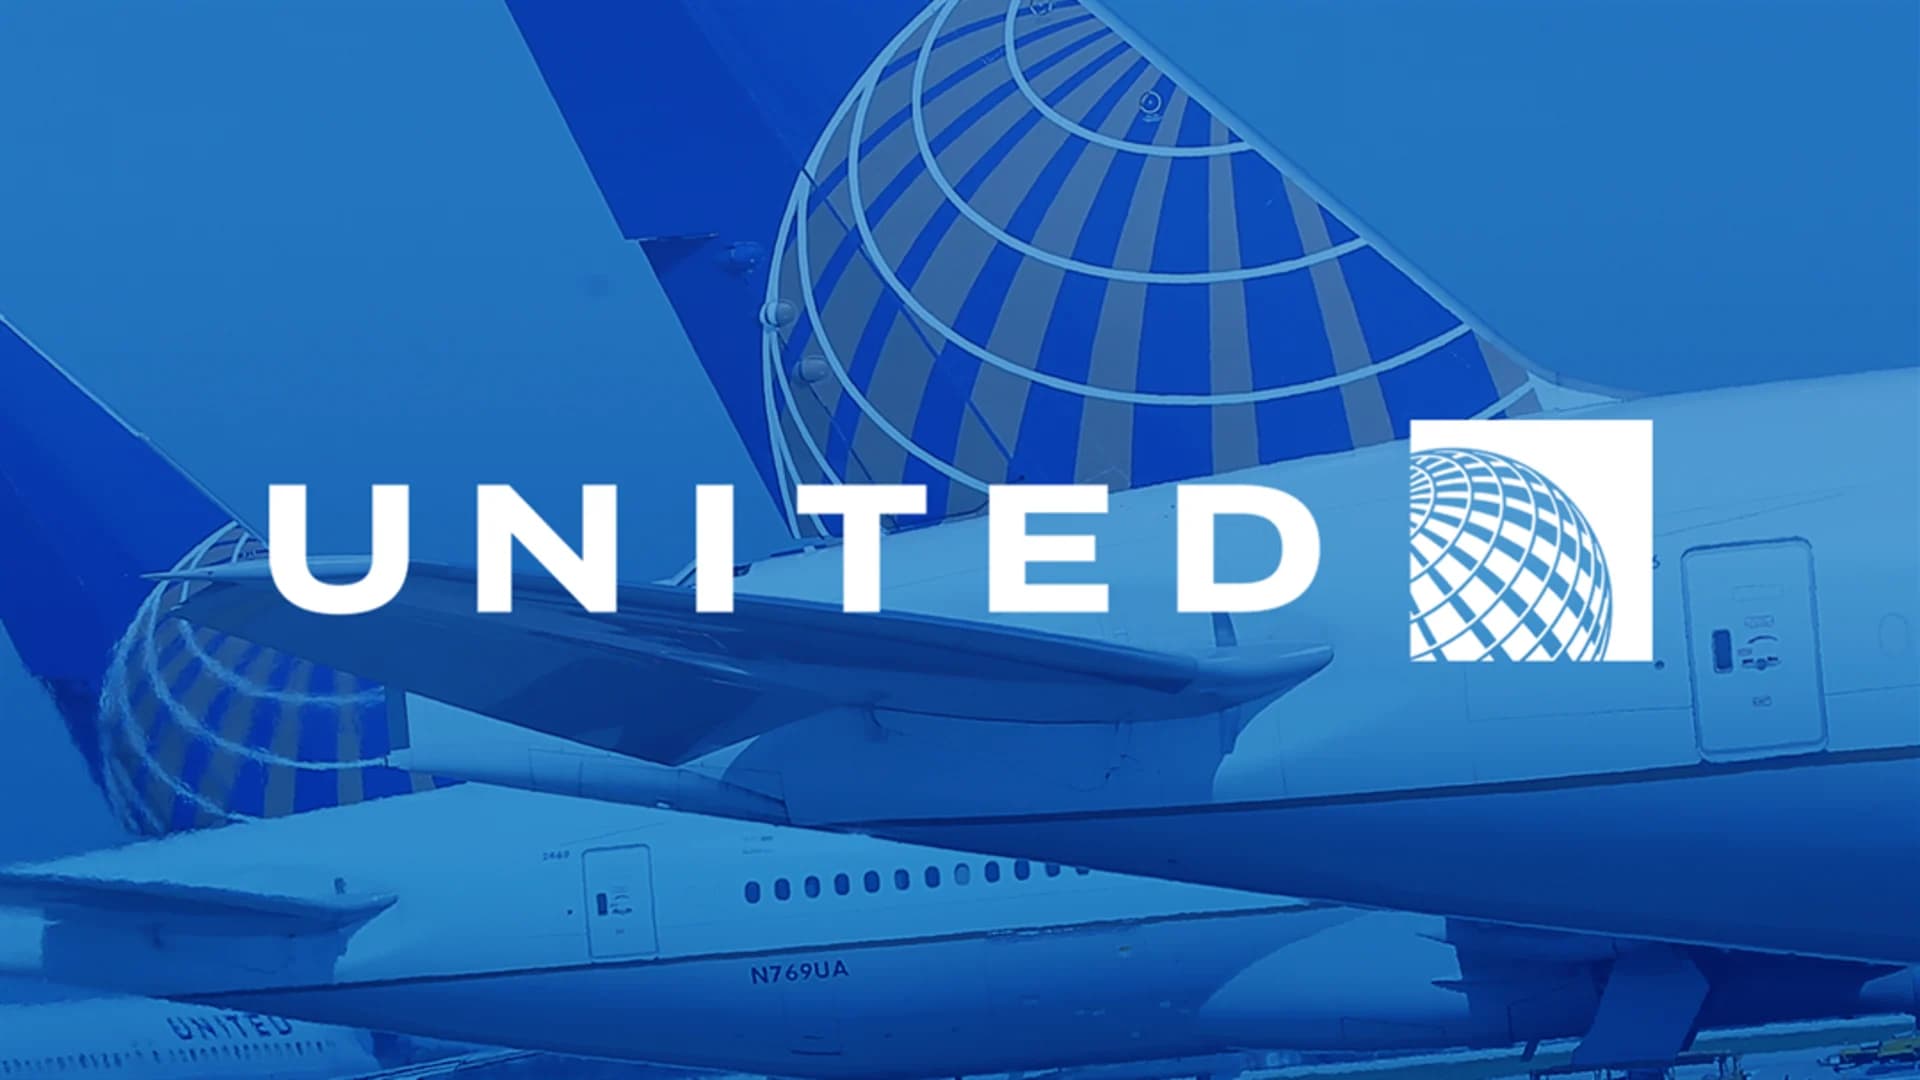 United Airlines, NYC partner to provide free round-trip flights for medical volunteers in COVID-19 fight